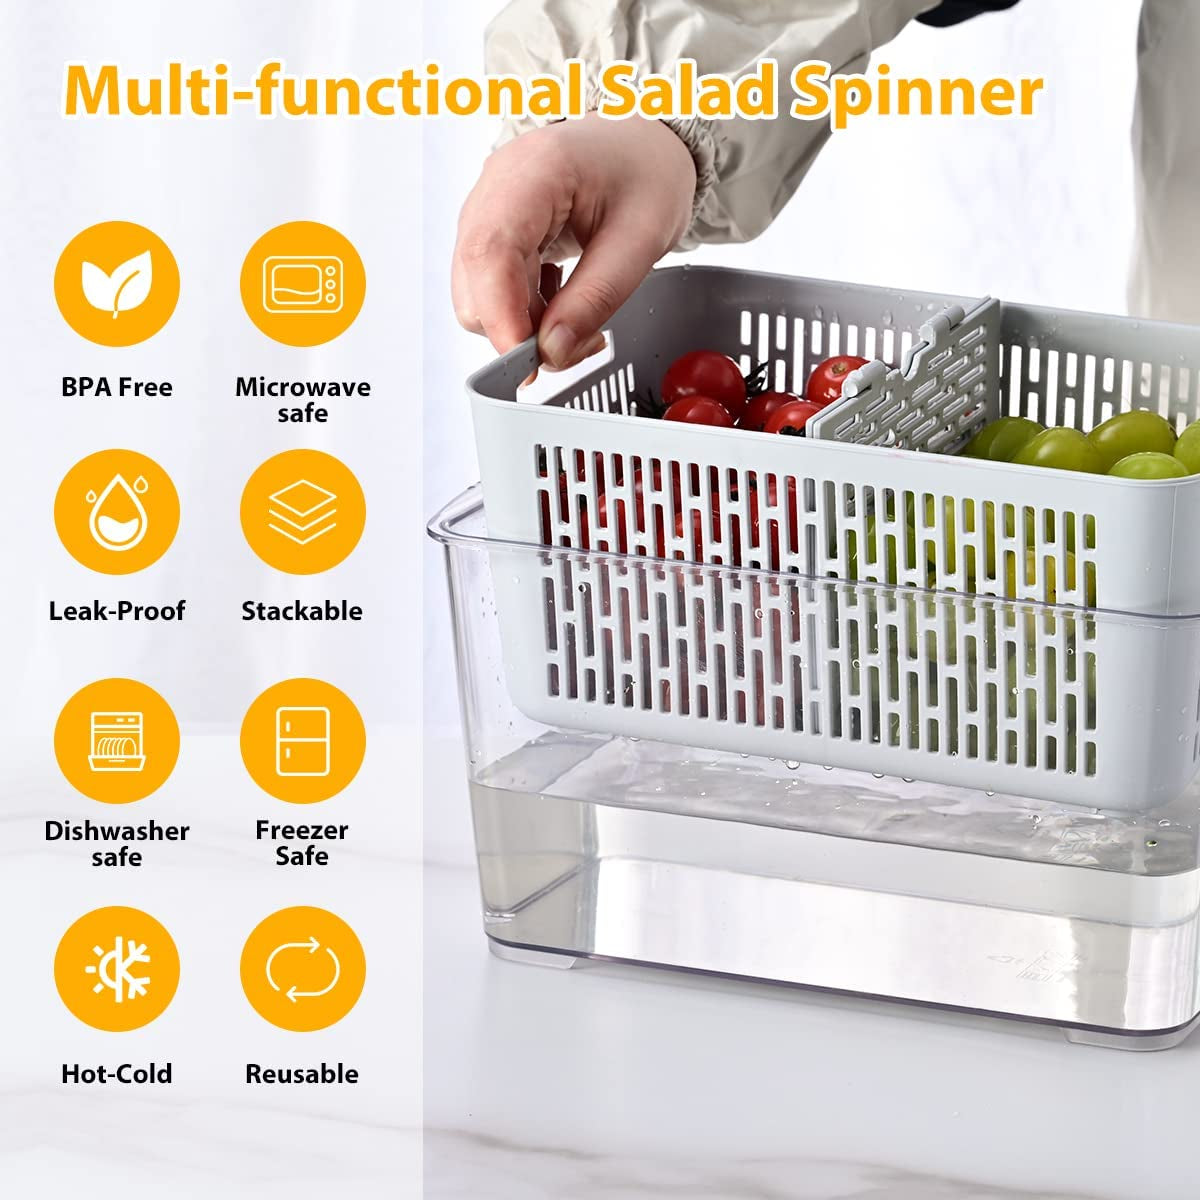 3 Pack Storage Containers for Refrigerator with 40 Pcs Reusable Food Storage Bags, Plastic Produce Saver Storage Containers, Draining Crisper with Strainers for Meat Fruit Veggies (Gray-B)